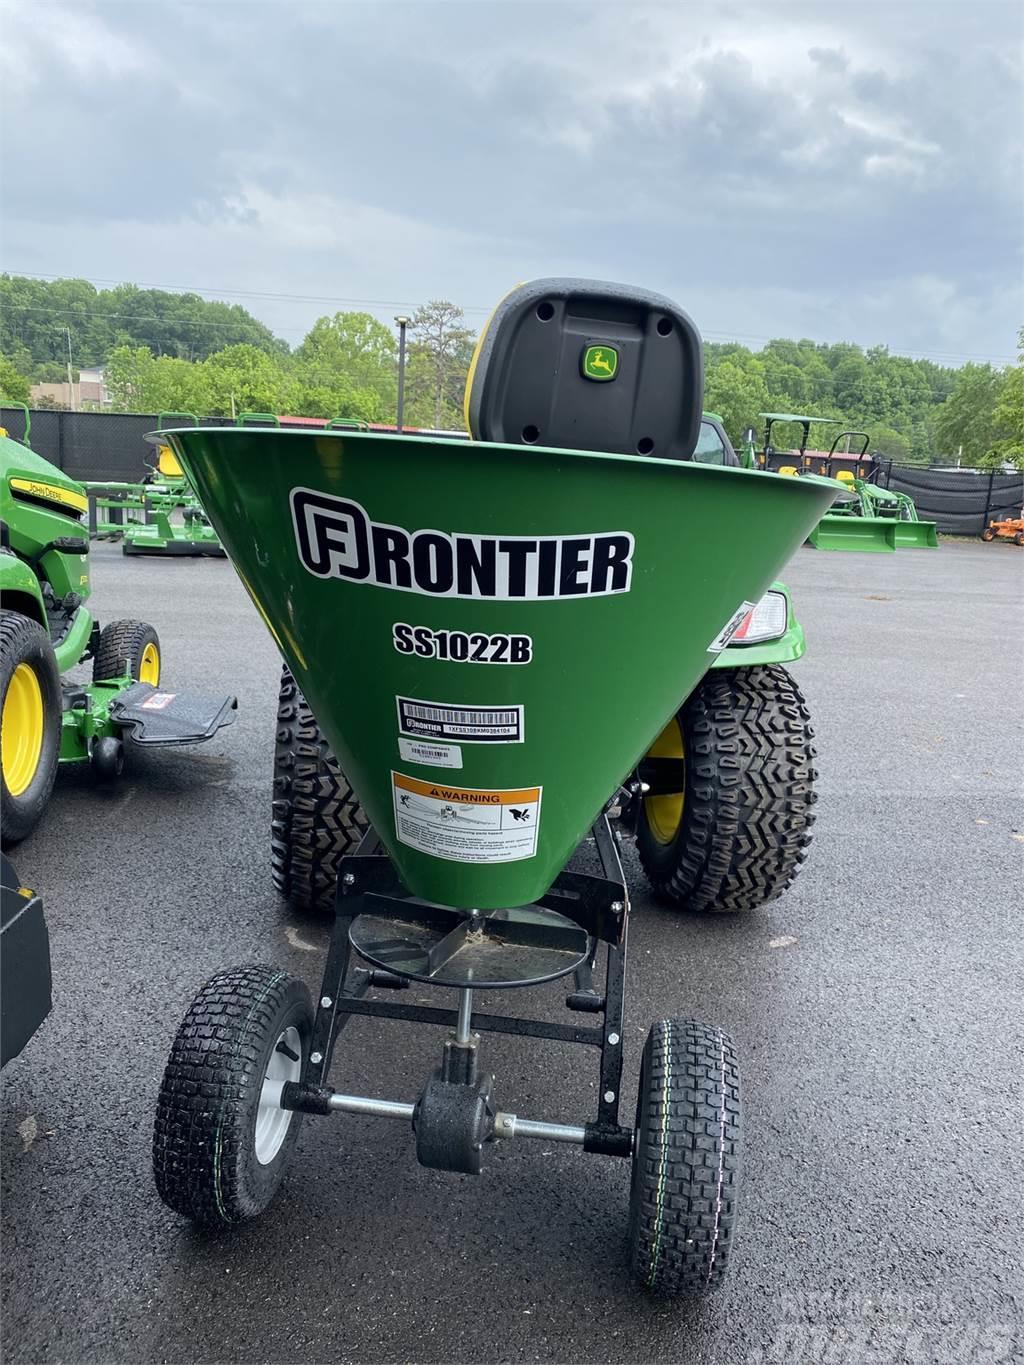 Frontier SS1022B Mineral spreaders